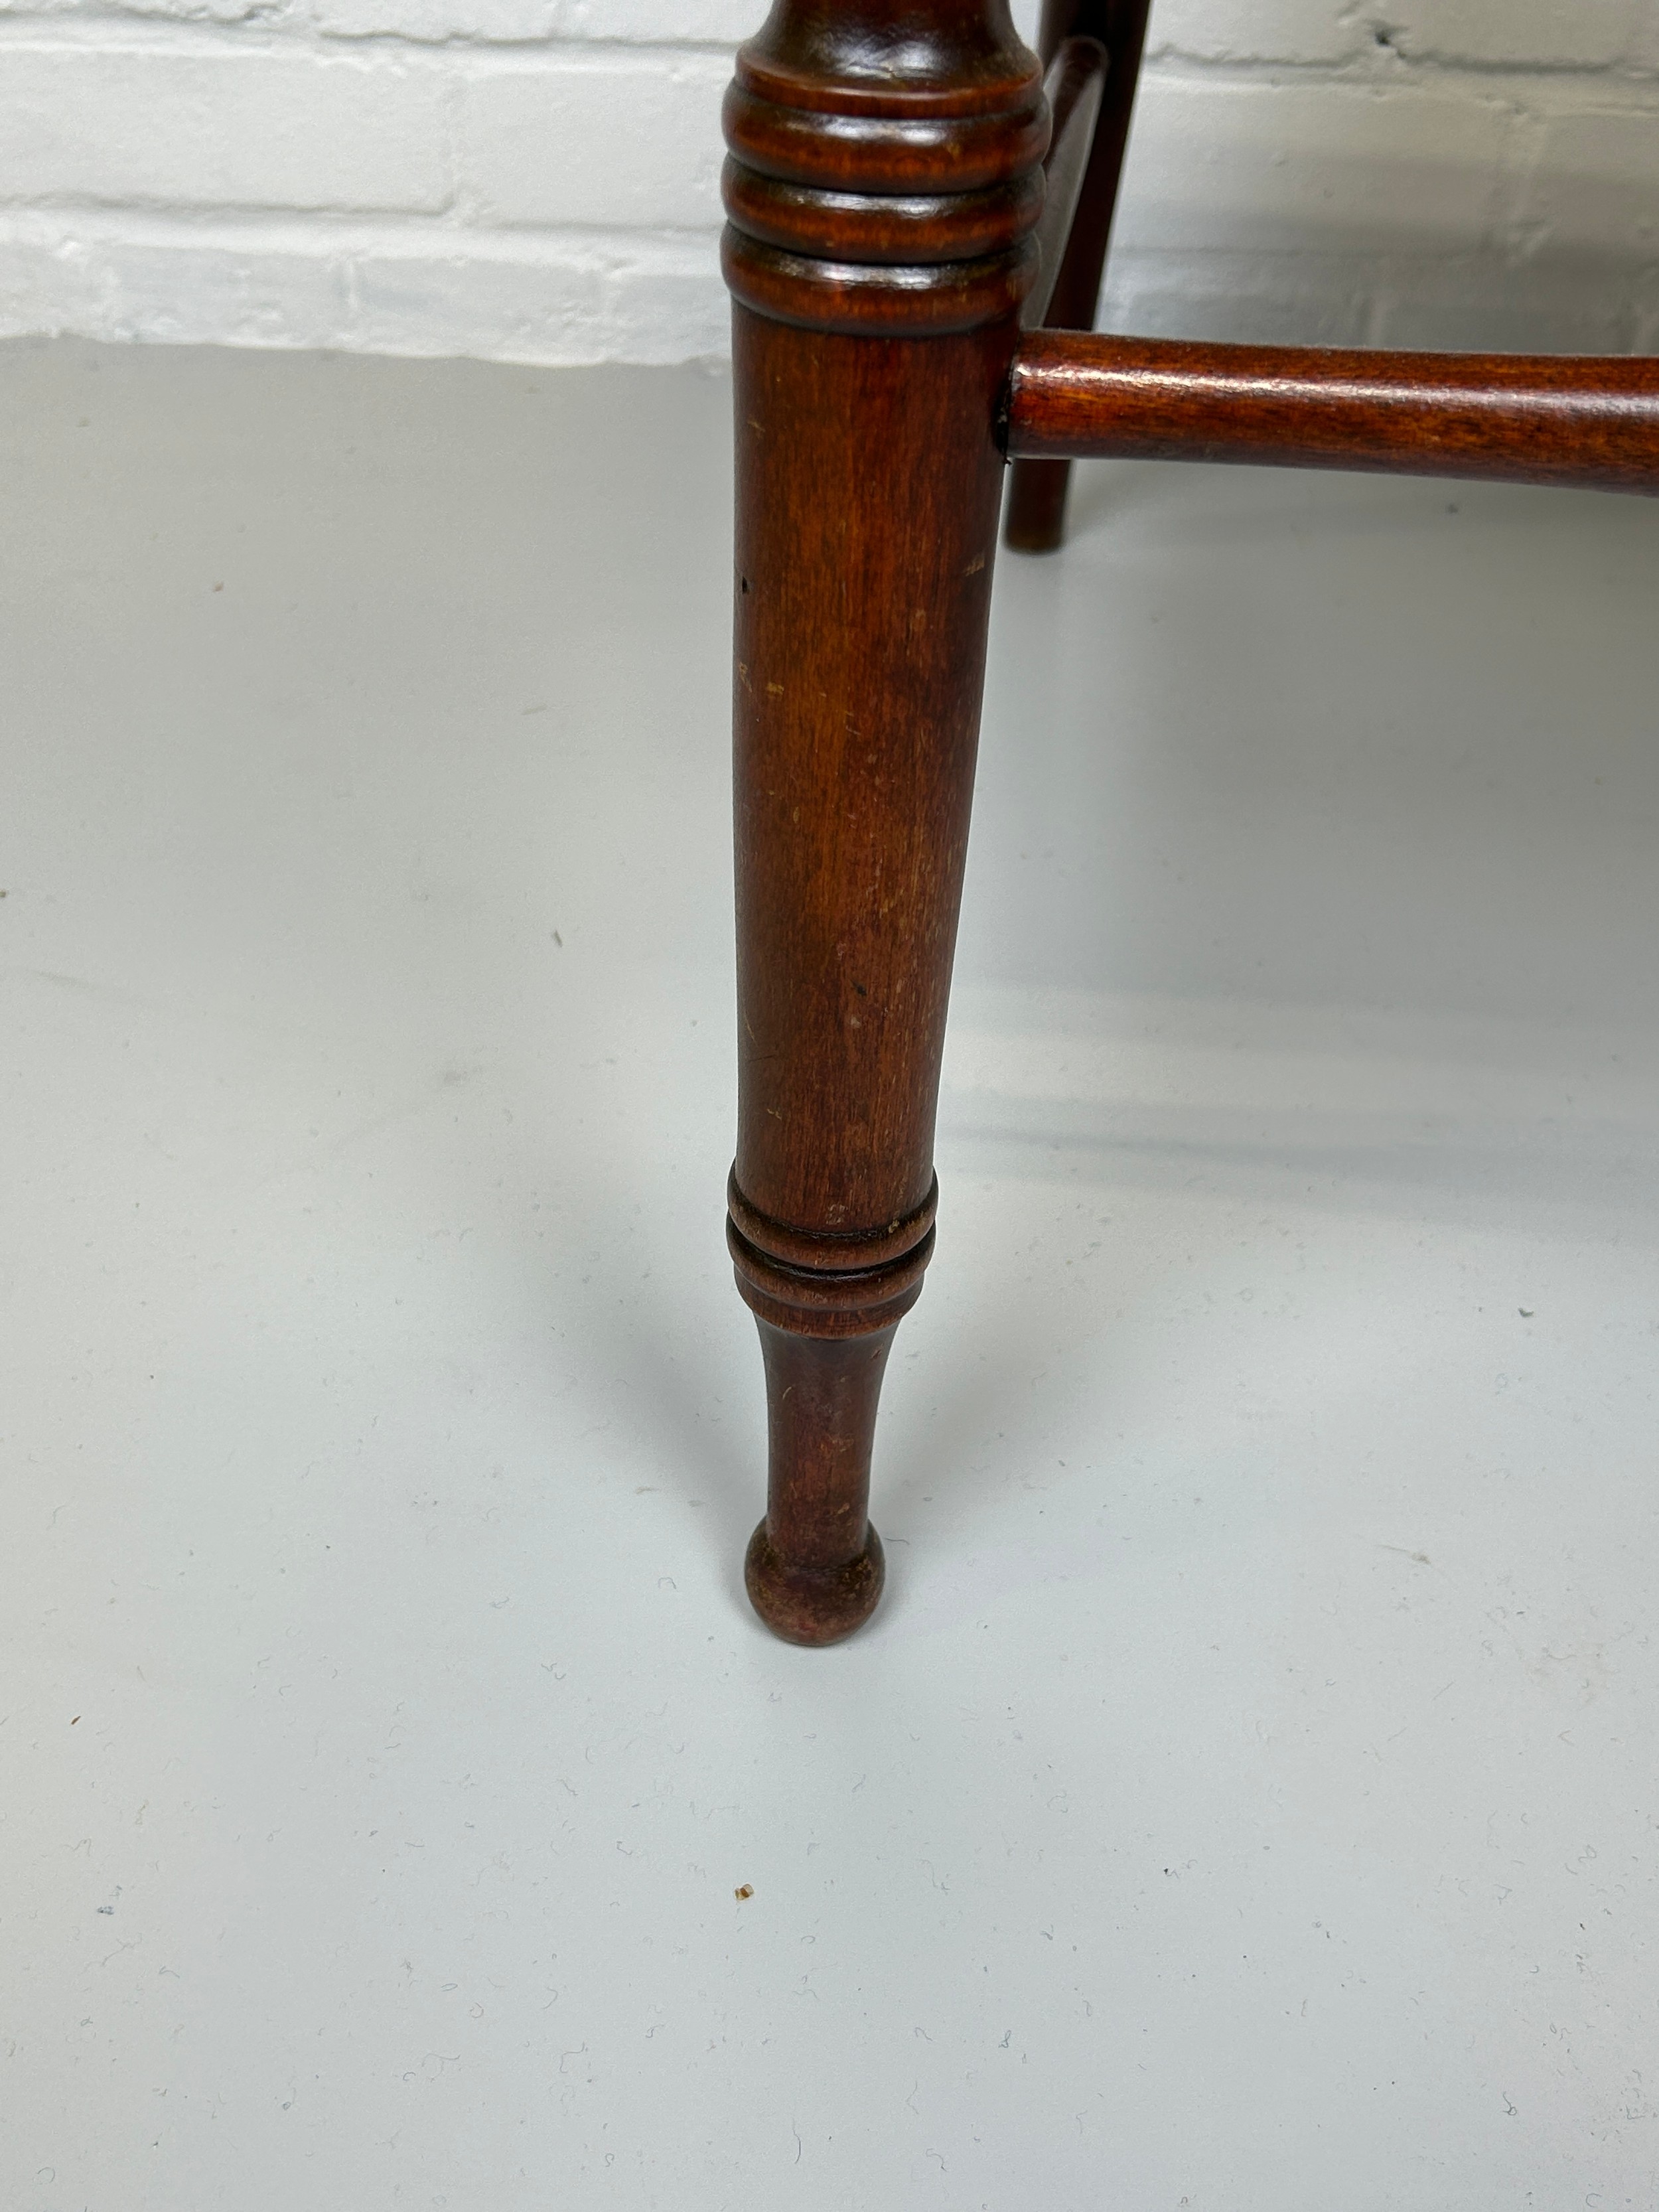 AN EARLY 20TH CENTURY ARMCHAIR OR DESK CHAIR, Flame mahogany with scroll arms and cane upholstered - Image 4 of 4